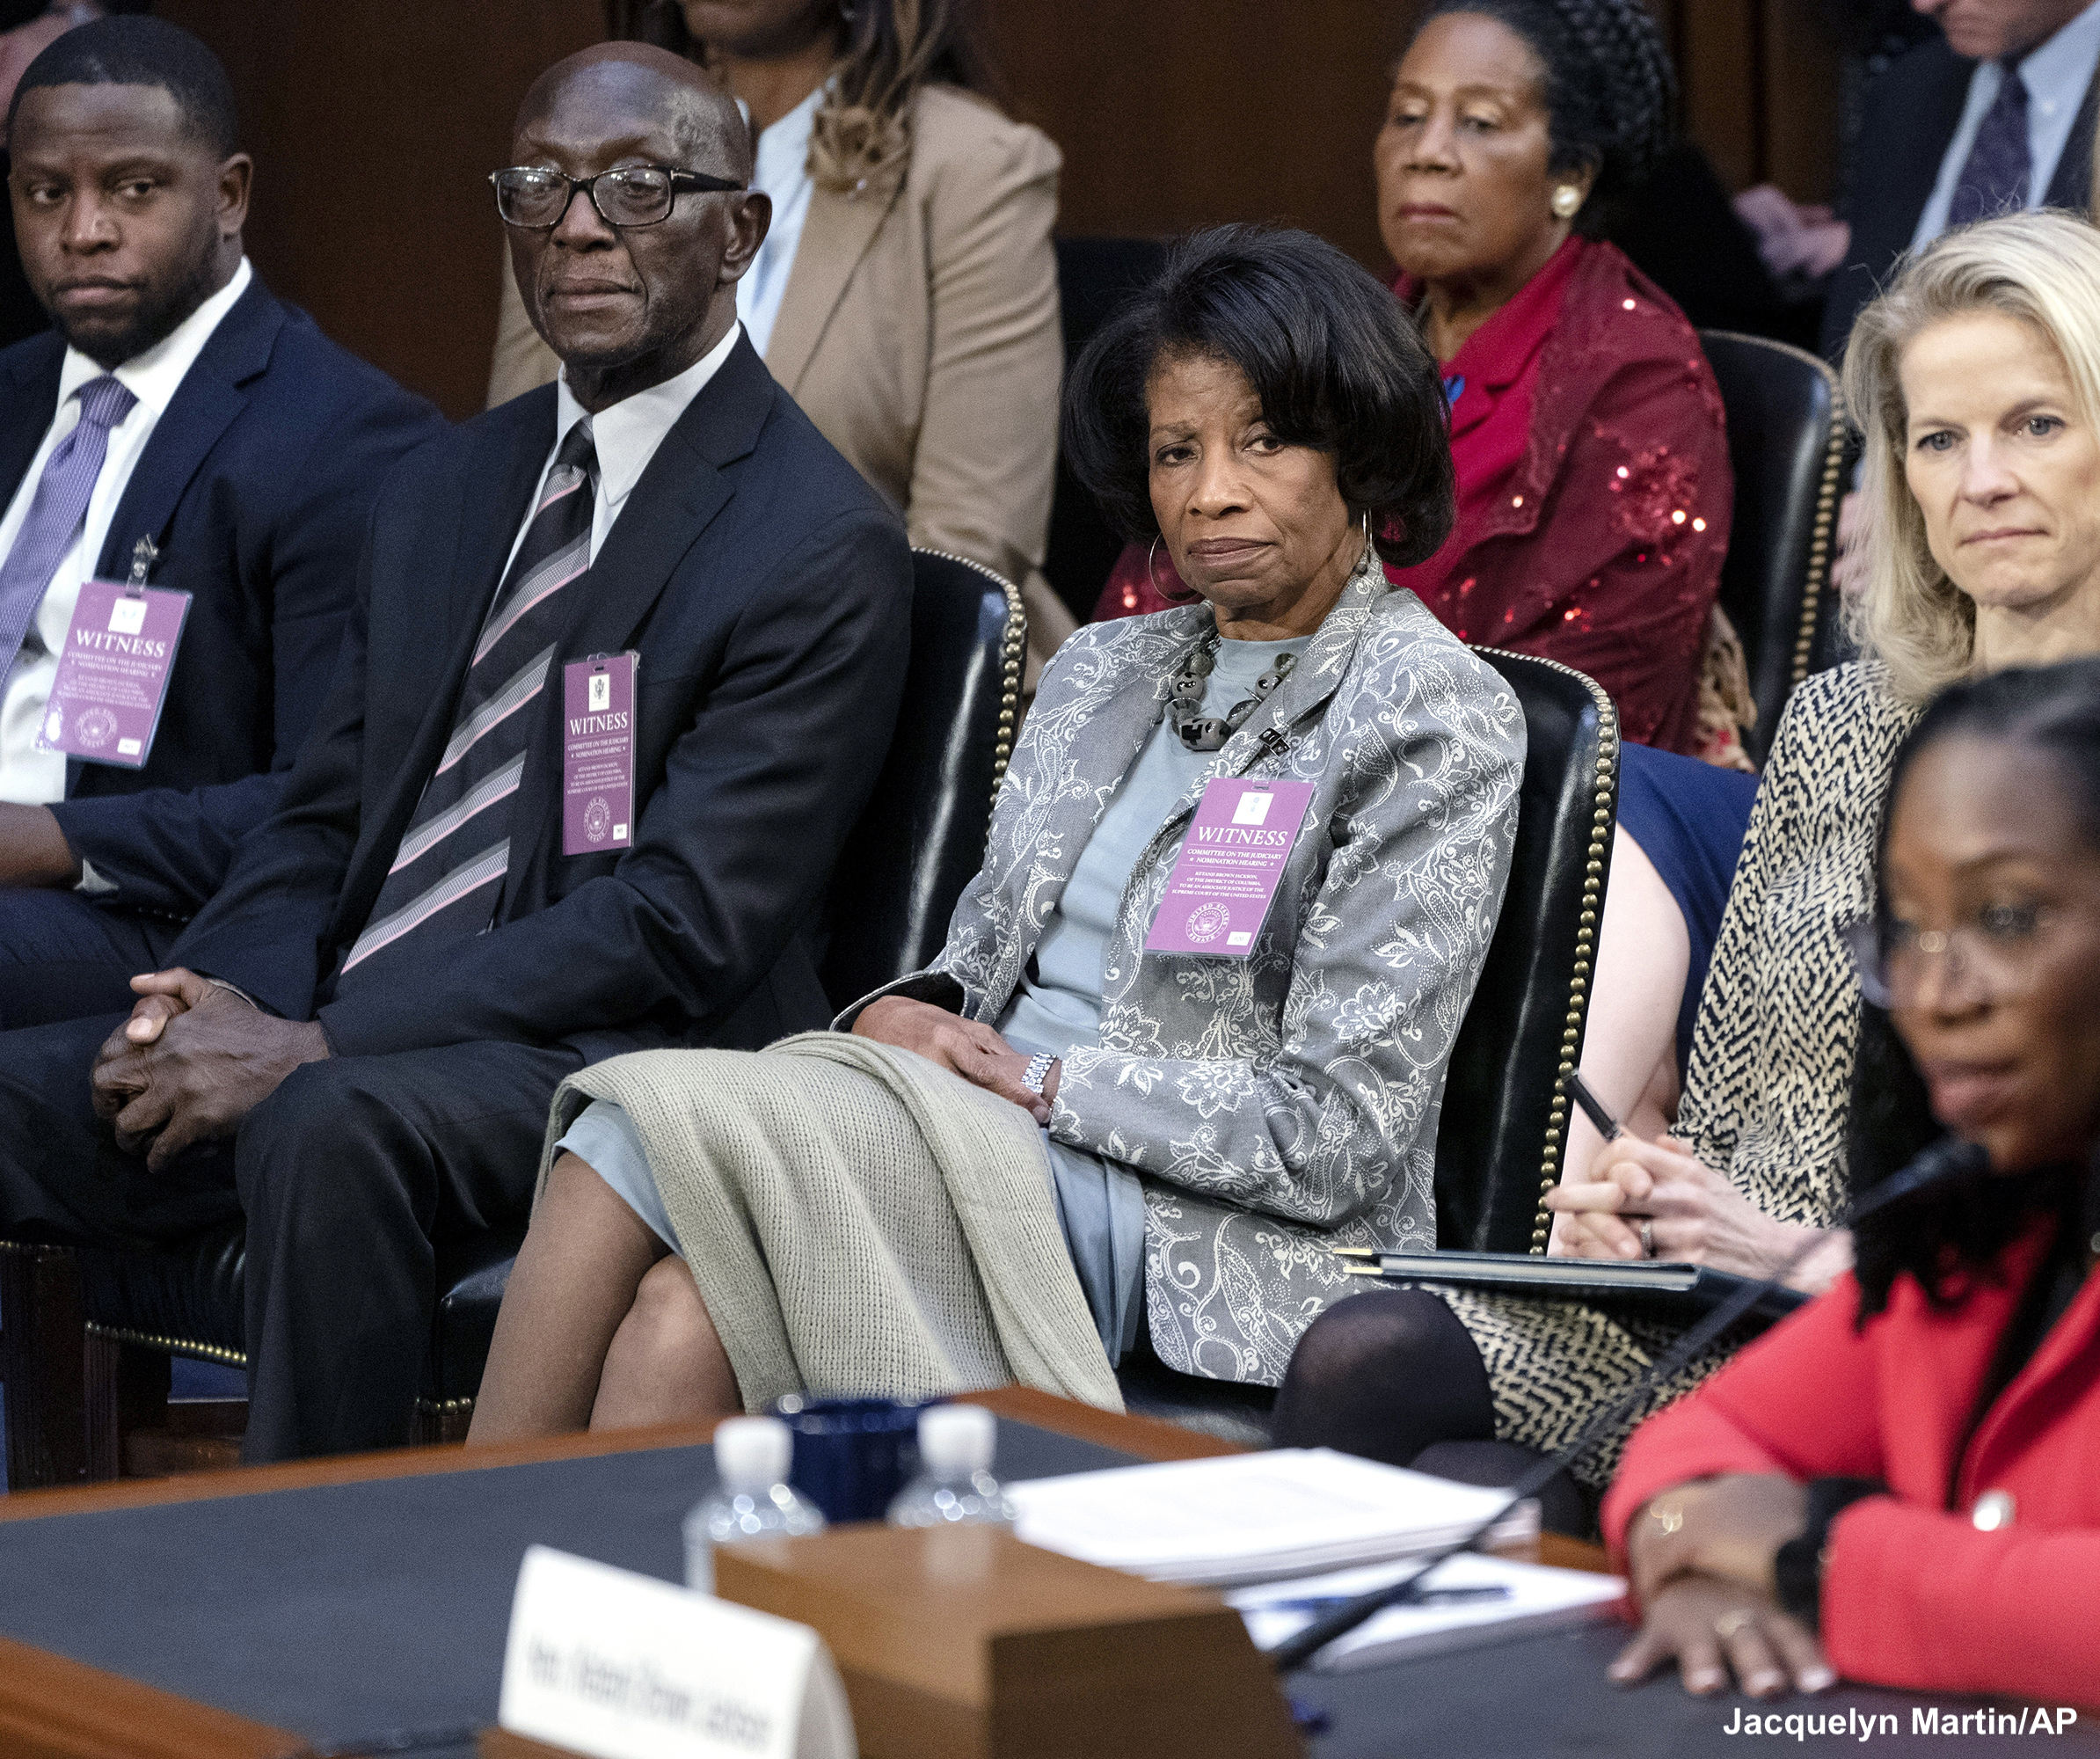 Abc News Members Of Judge Ketanji Brown Jackson S Family Look On As She Testifies During Her Supreme Court Confirmation Hearing Live Updates T Co Zza30yazrs T Co Rp6hwtwenv Twitter